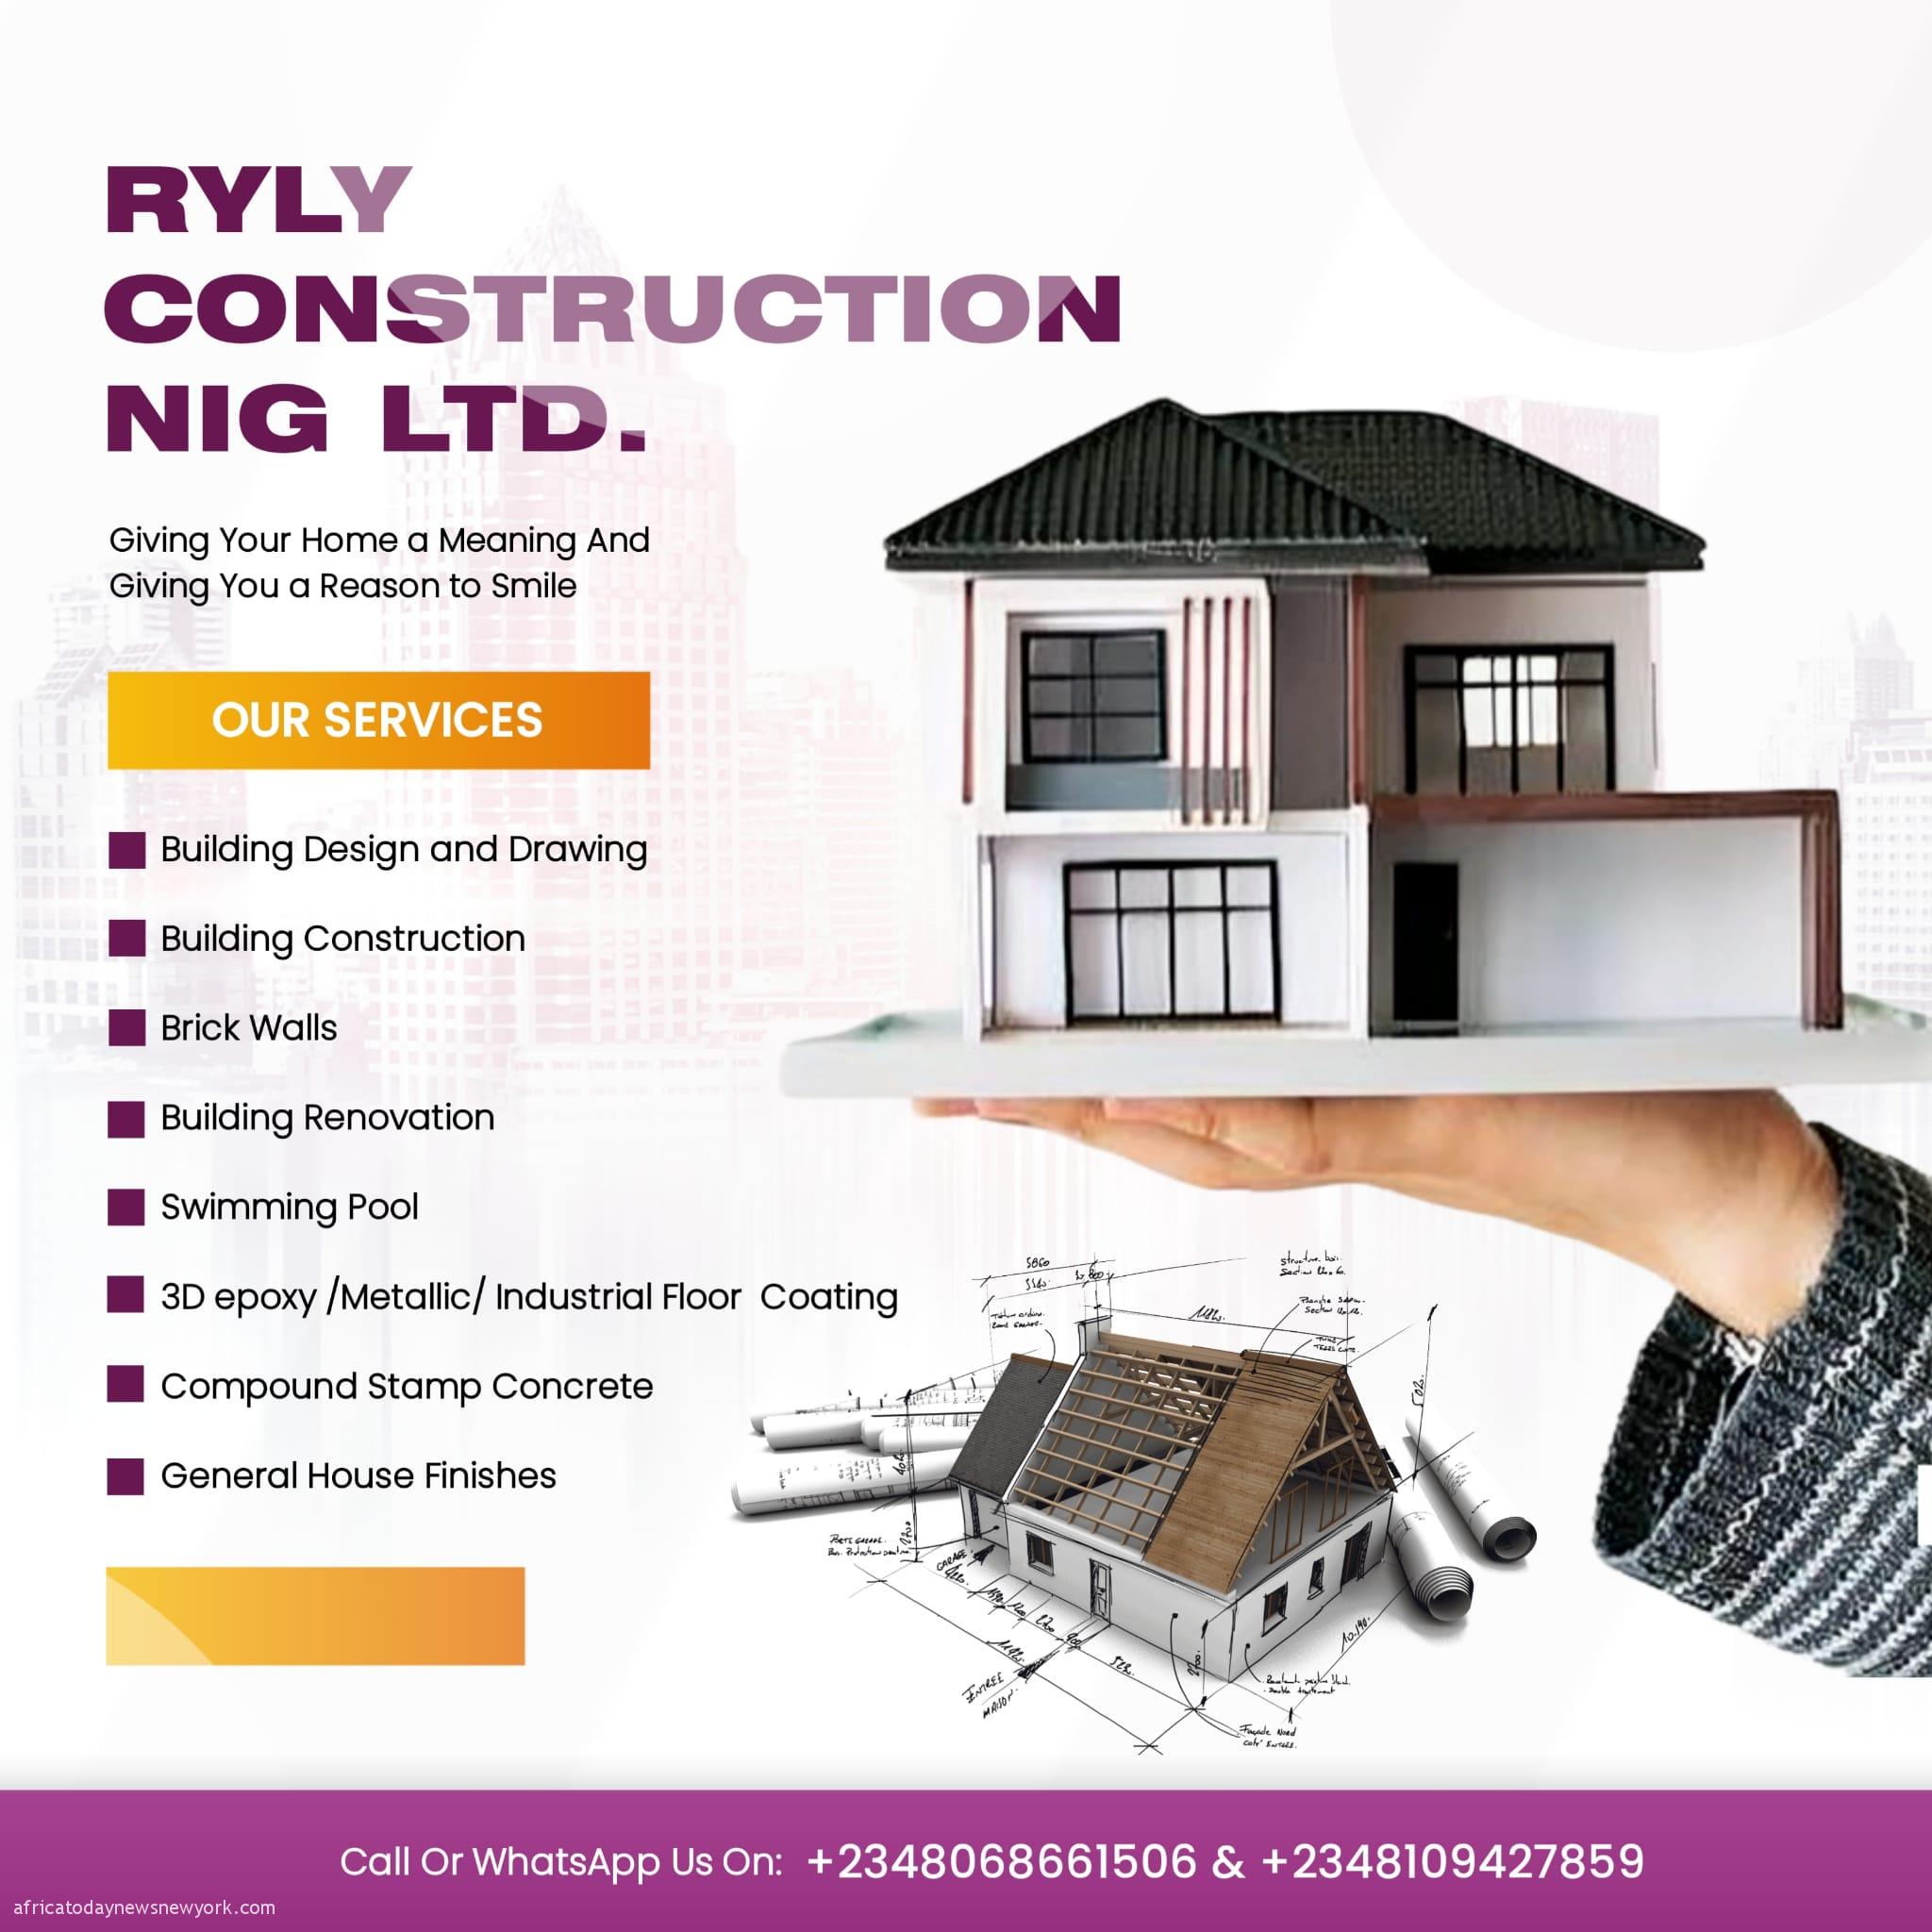 RYLY Construction: Delivering Class With Ease